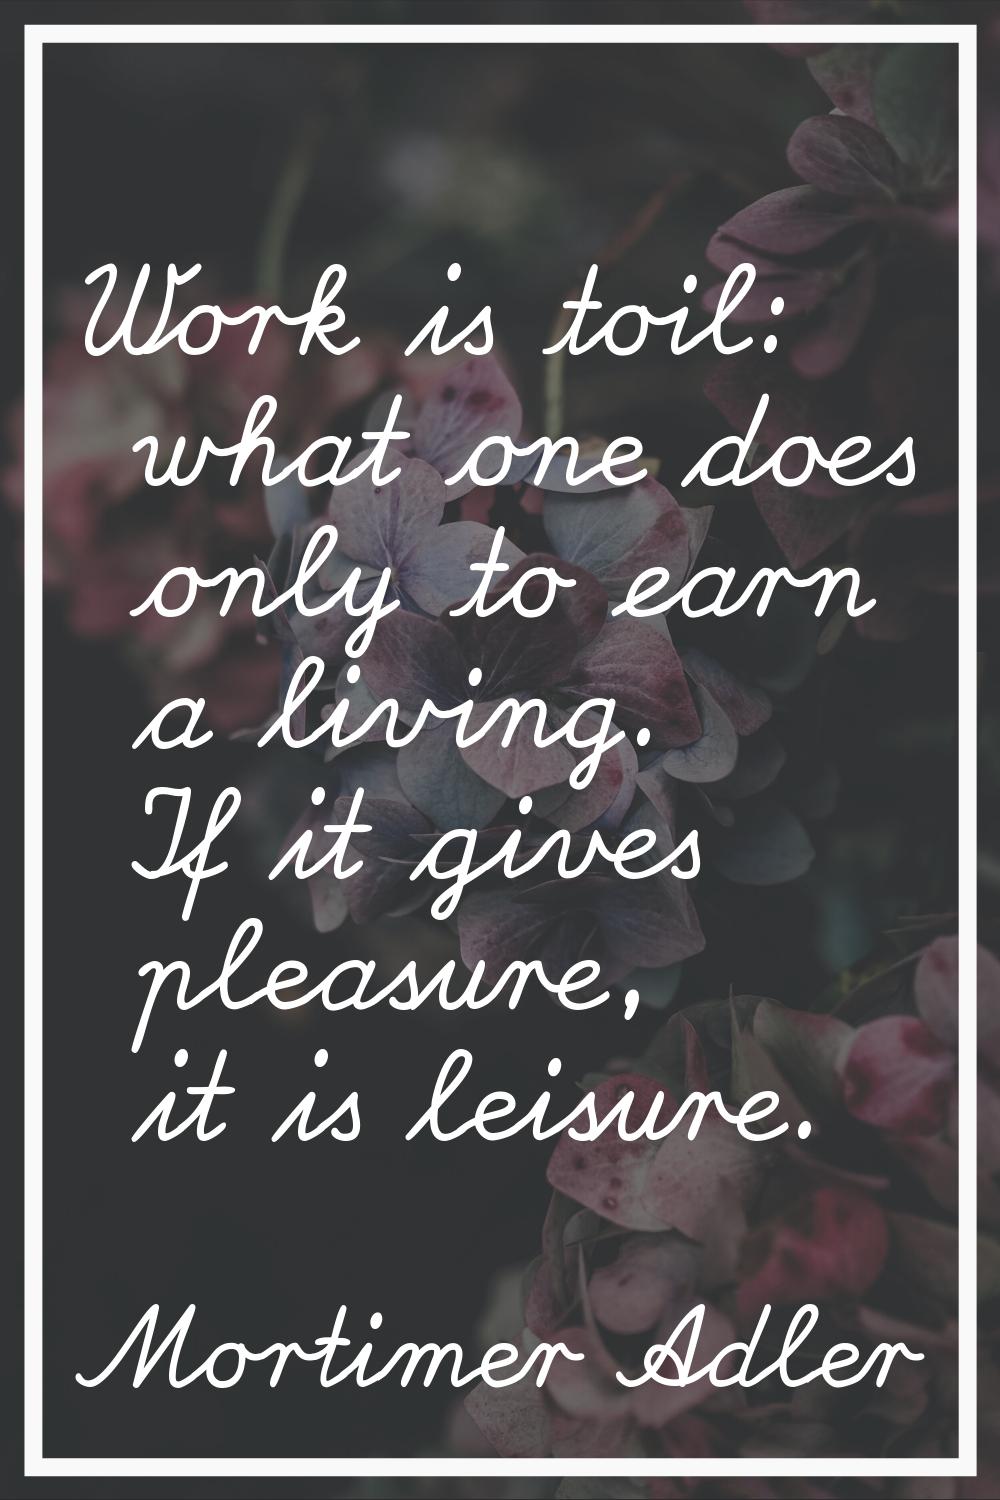 Work is toil: what one does only to earn a living. If it gives pleasure, it is leisure.